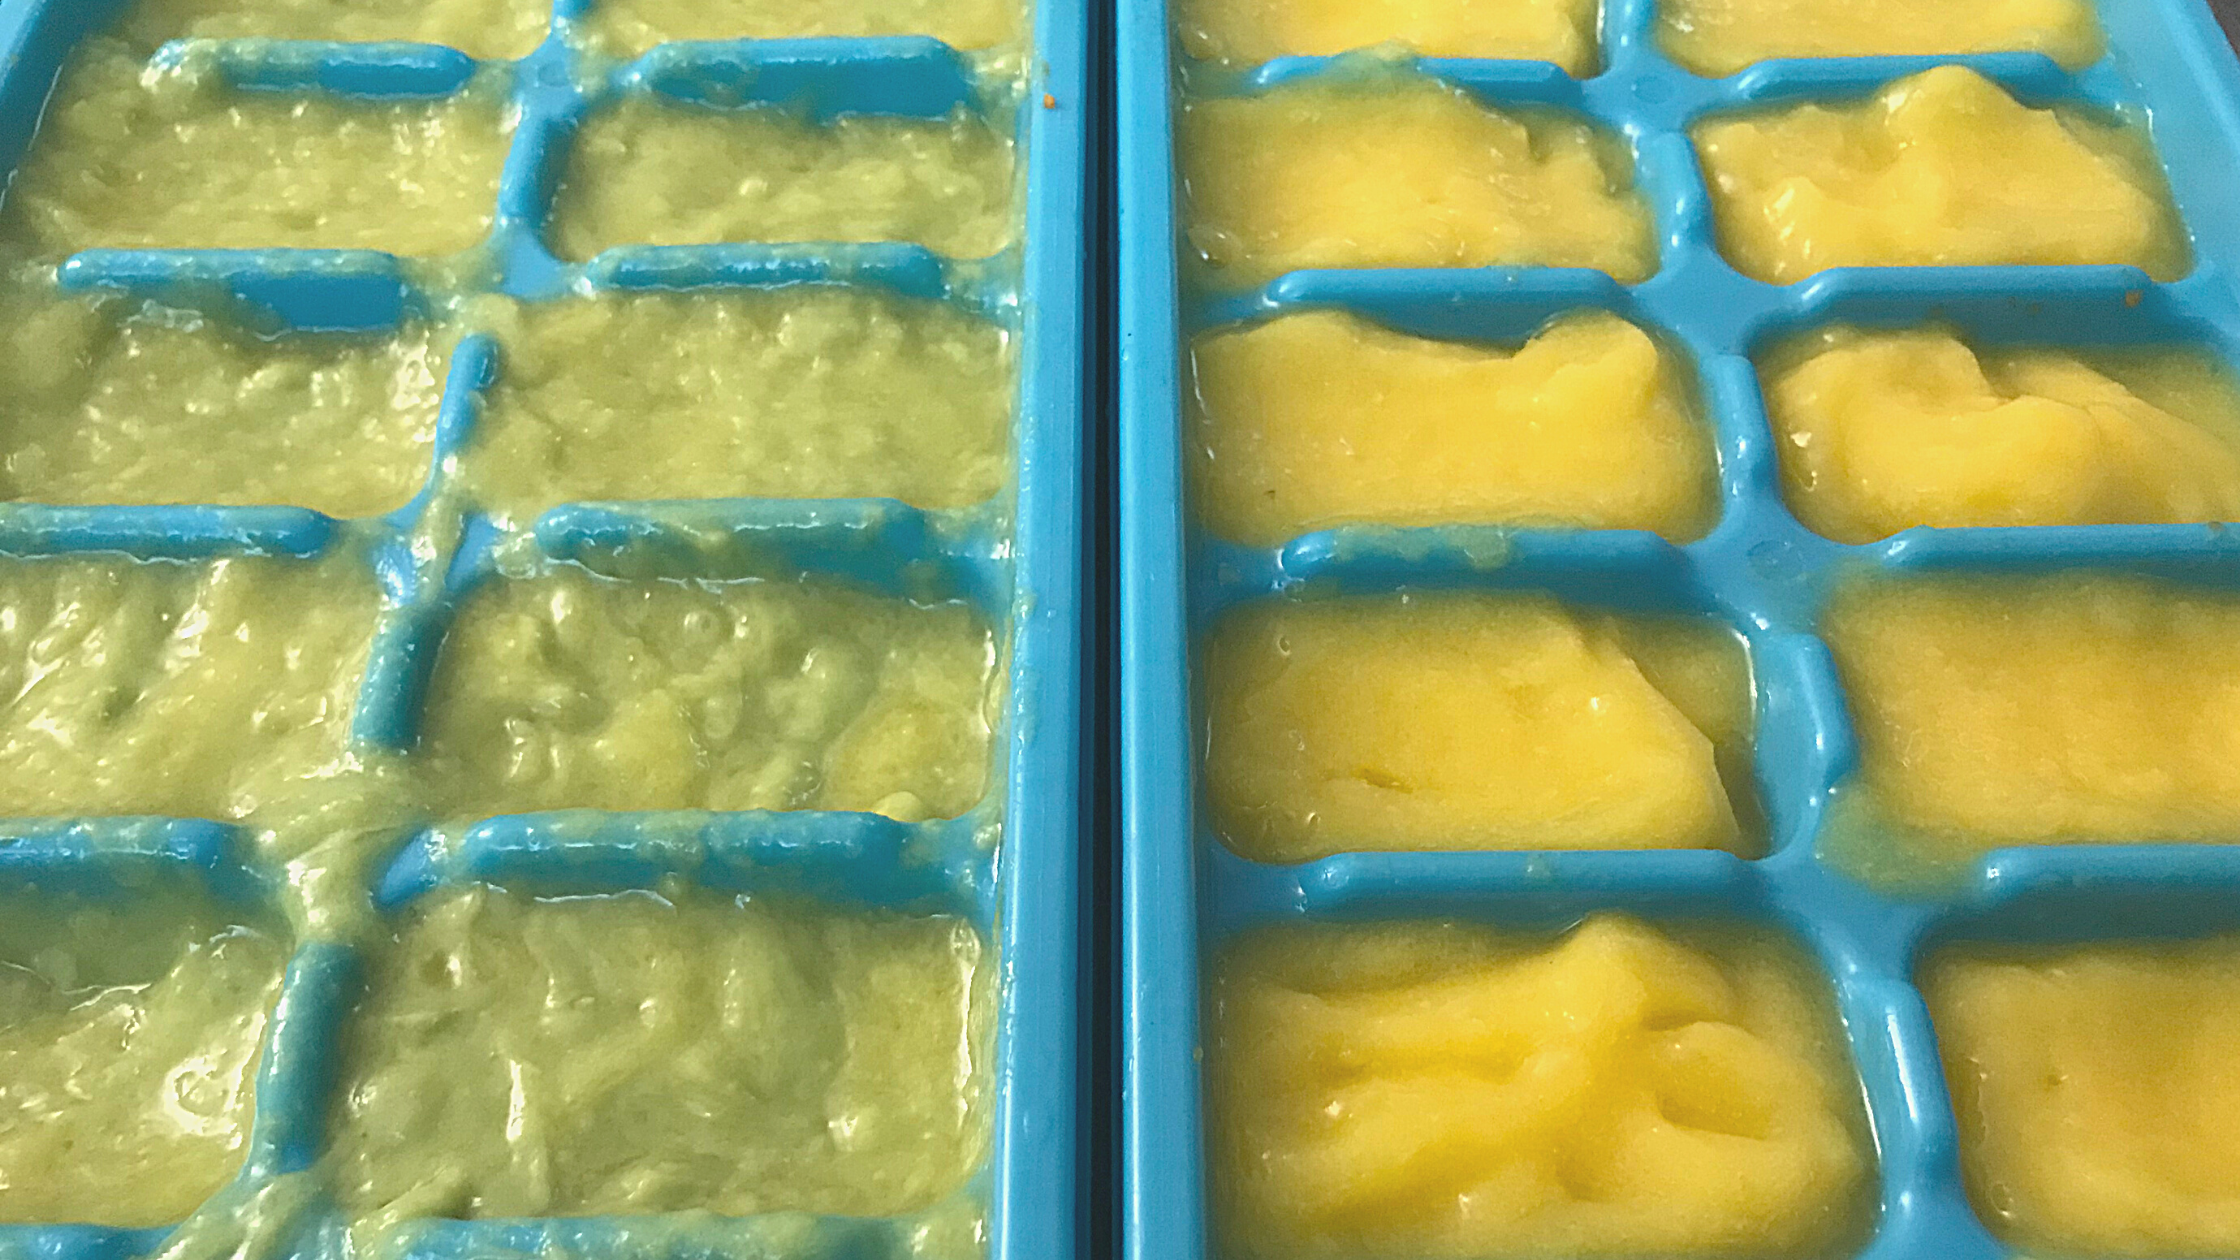 Homemade Baby Food in Ice Cube Trays